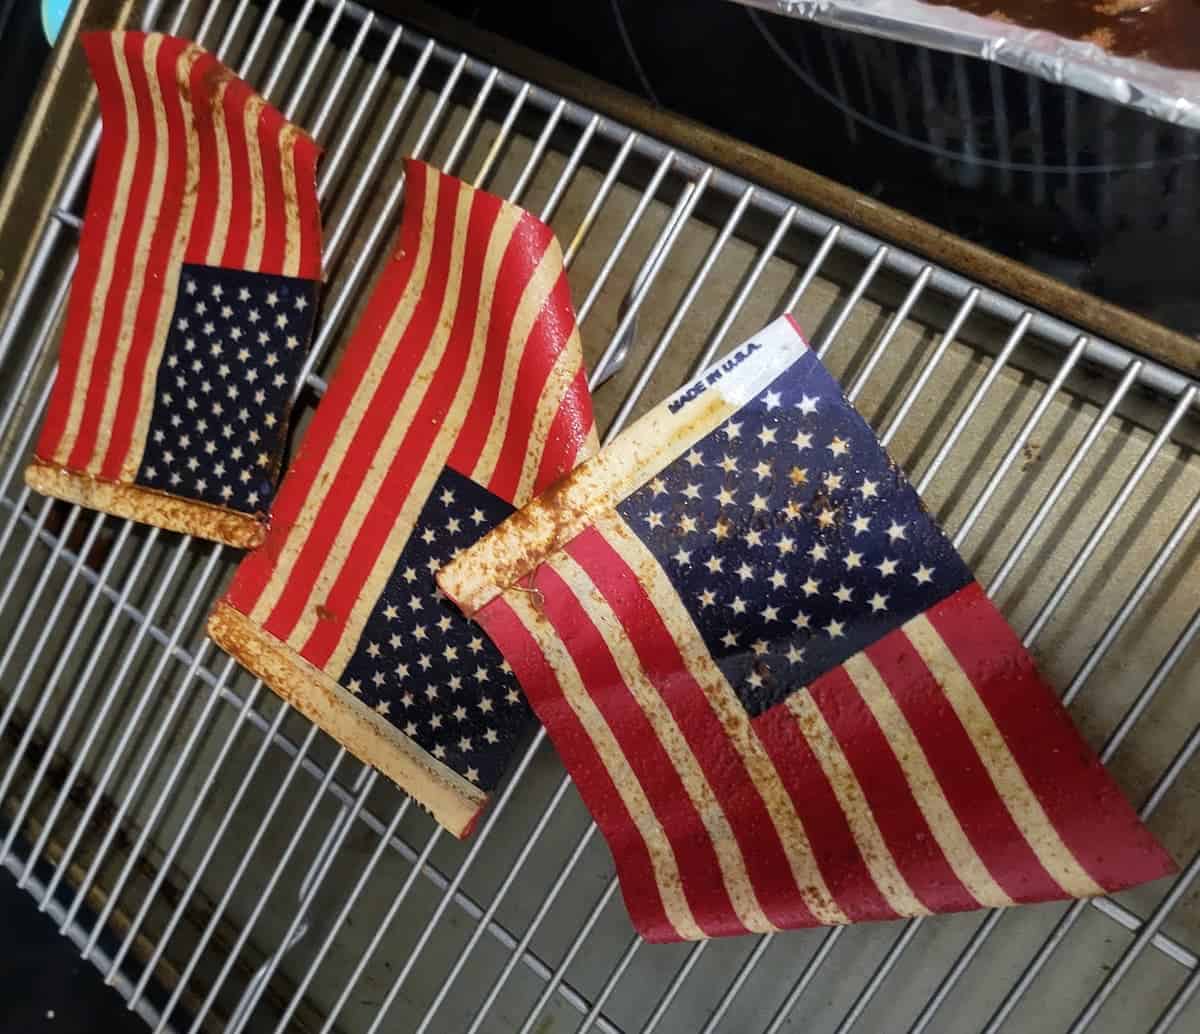 Three pieces of cooked bacon with American flag designs on a cooling rack.